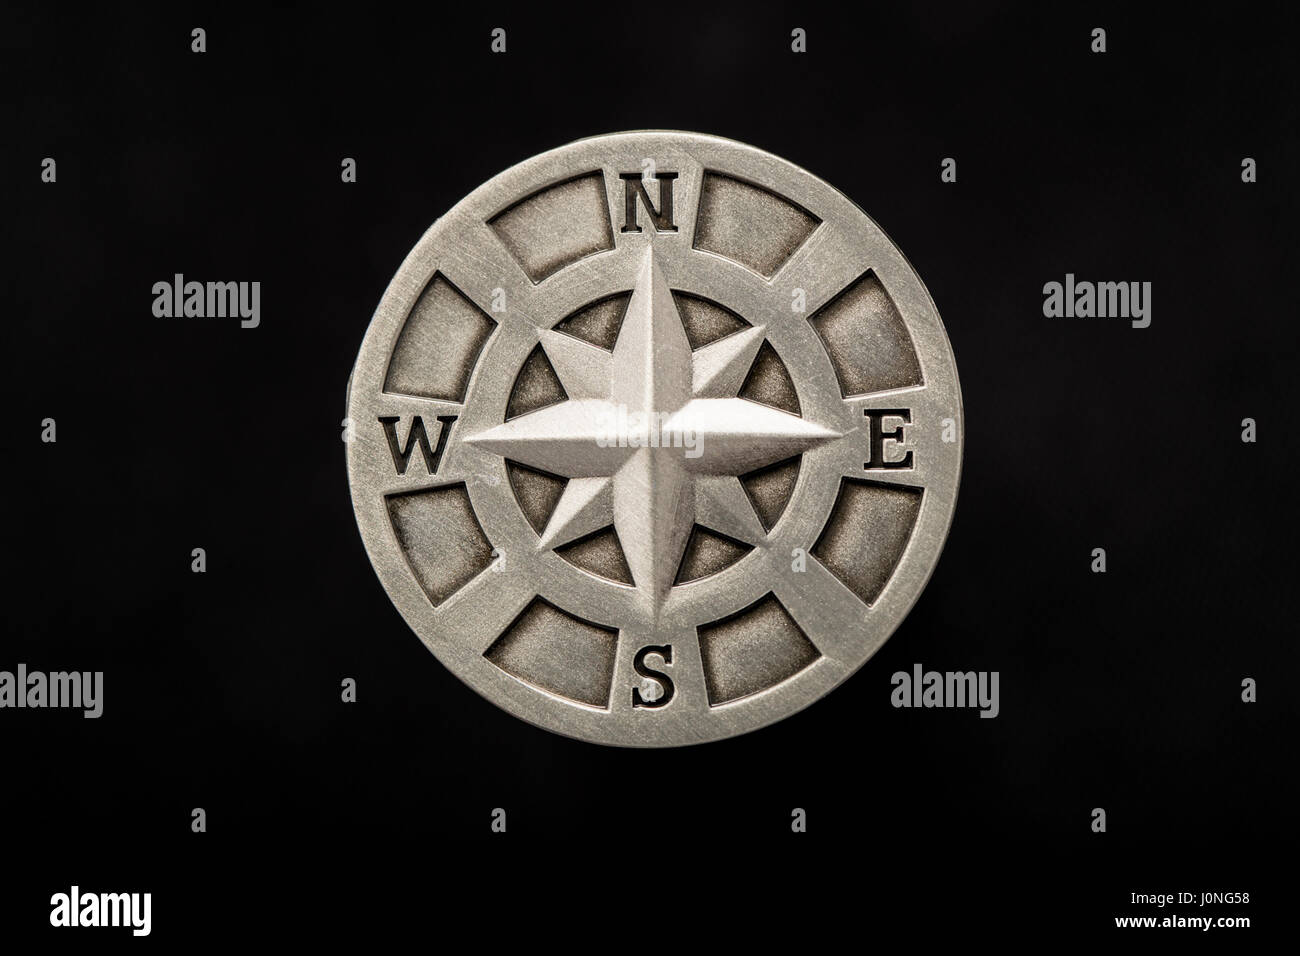 Simple graphic object of a navigational compass rose Stock Photo